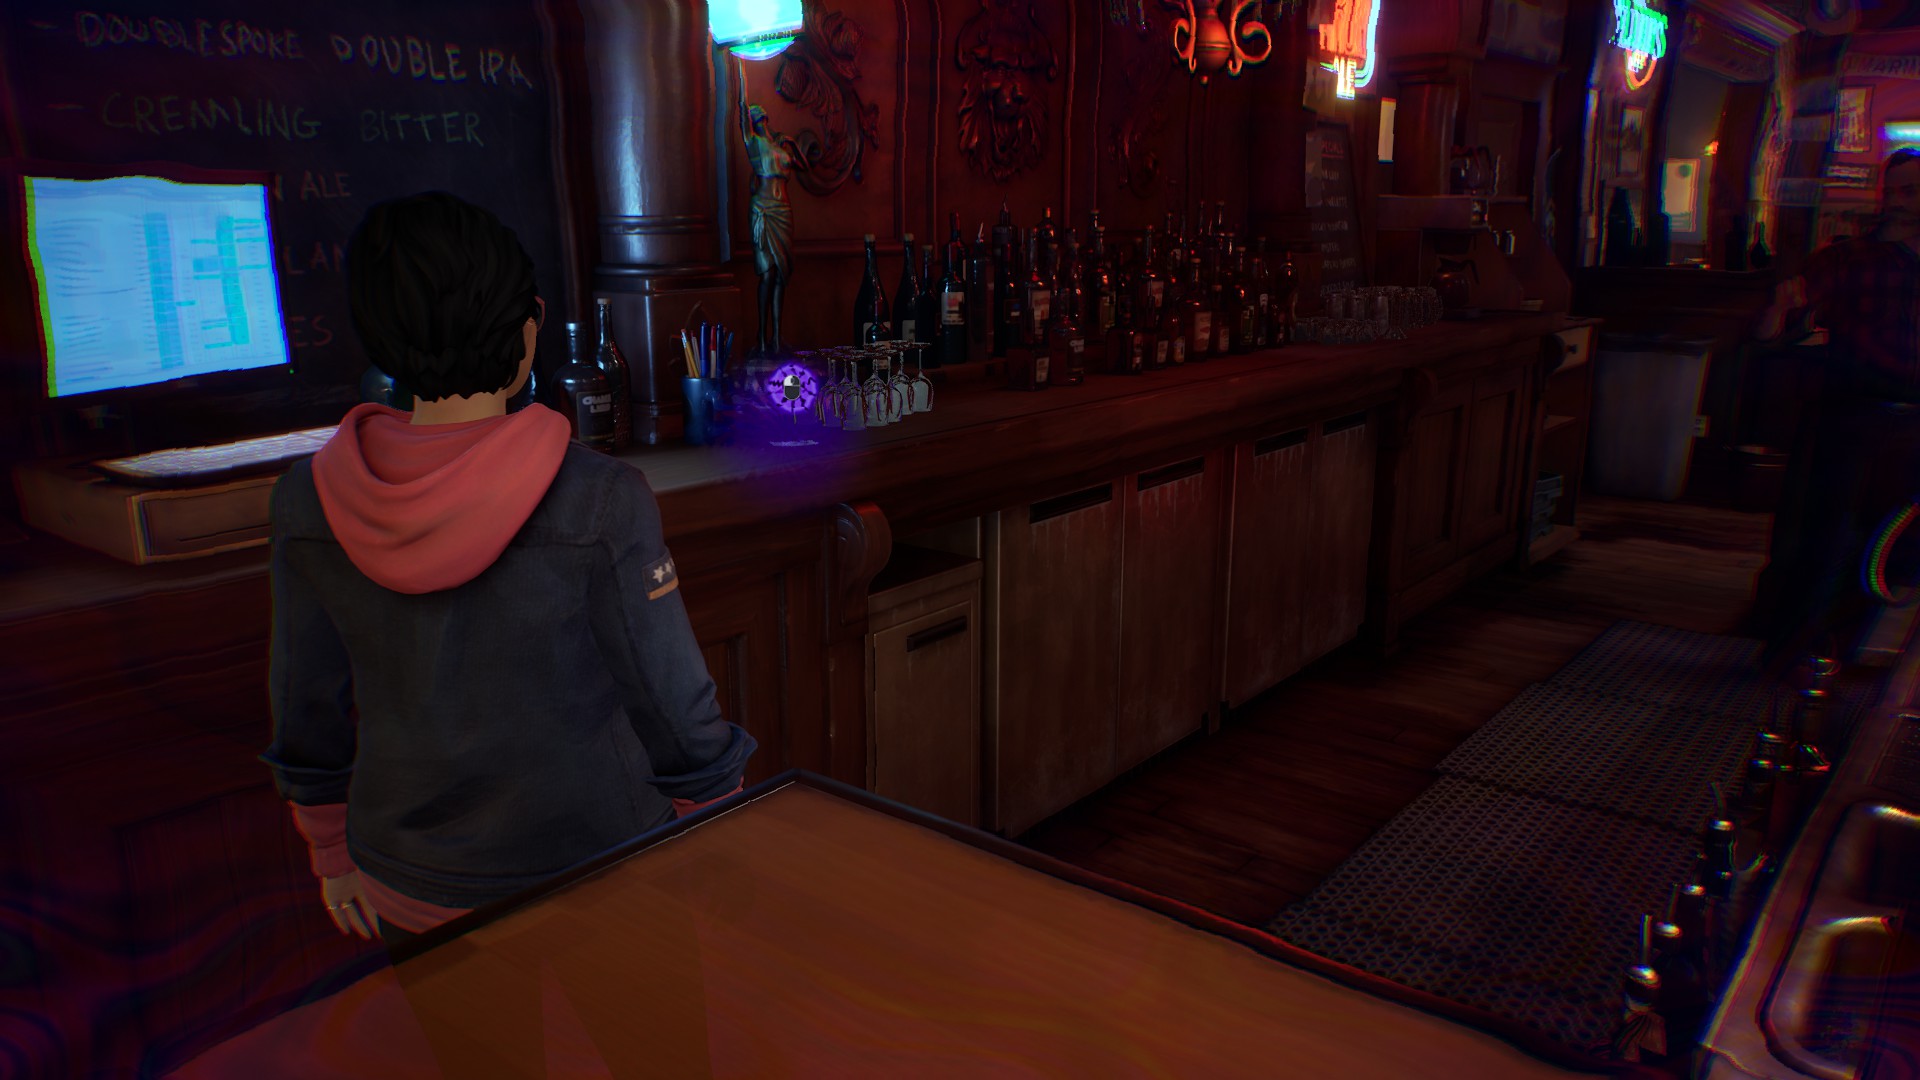 Something You Build achievement in Life is Strange: True Colors